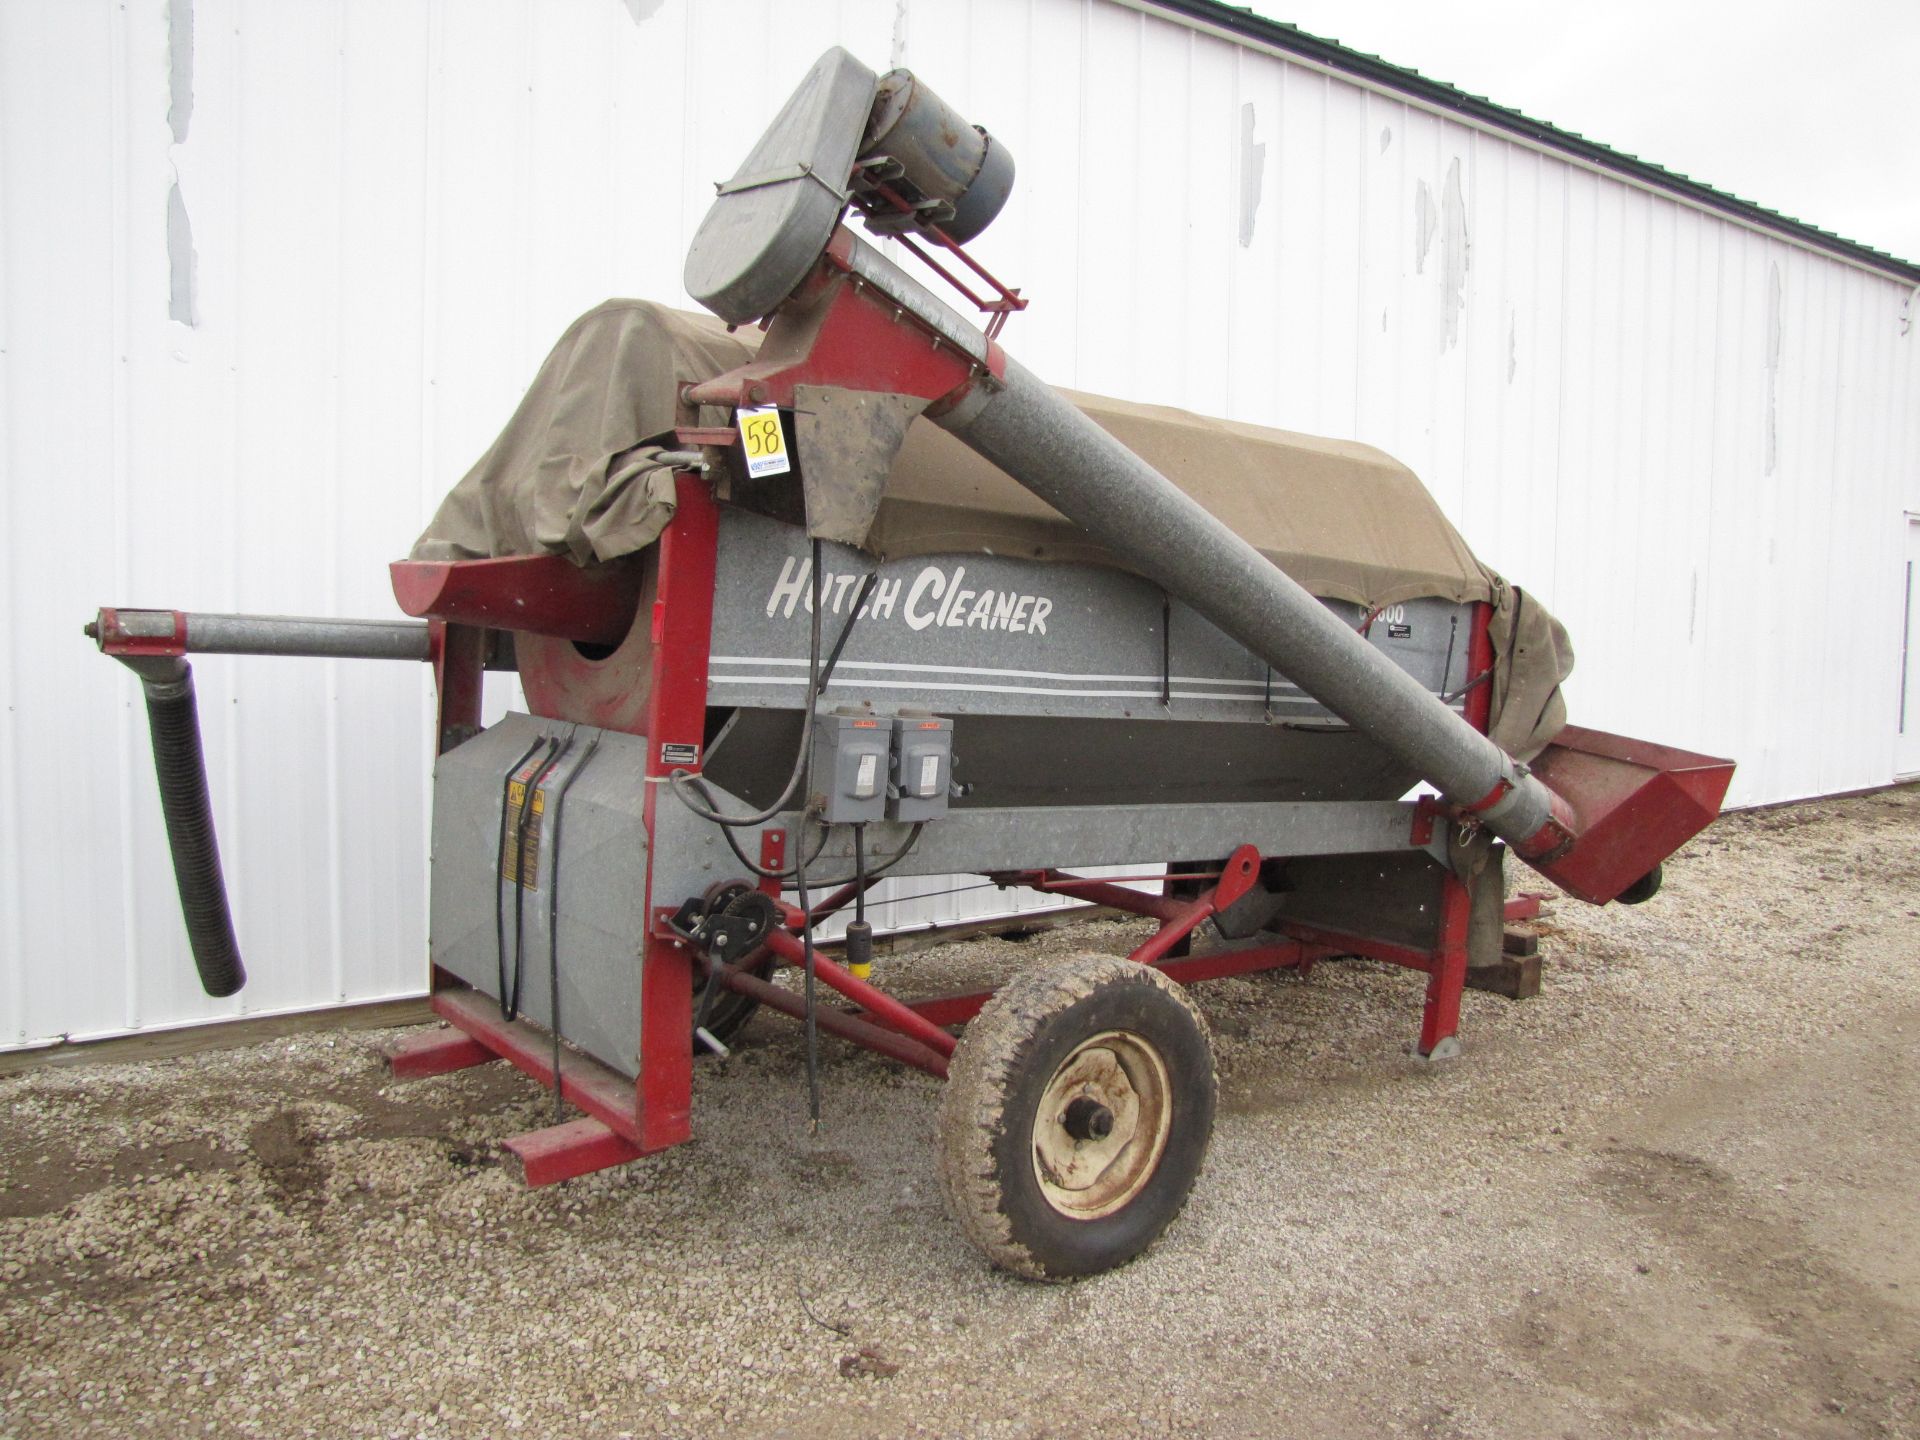 Hutch Cleaner C-1600 Grain Cleaner - Image 5 of 27